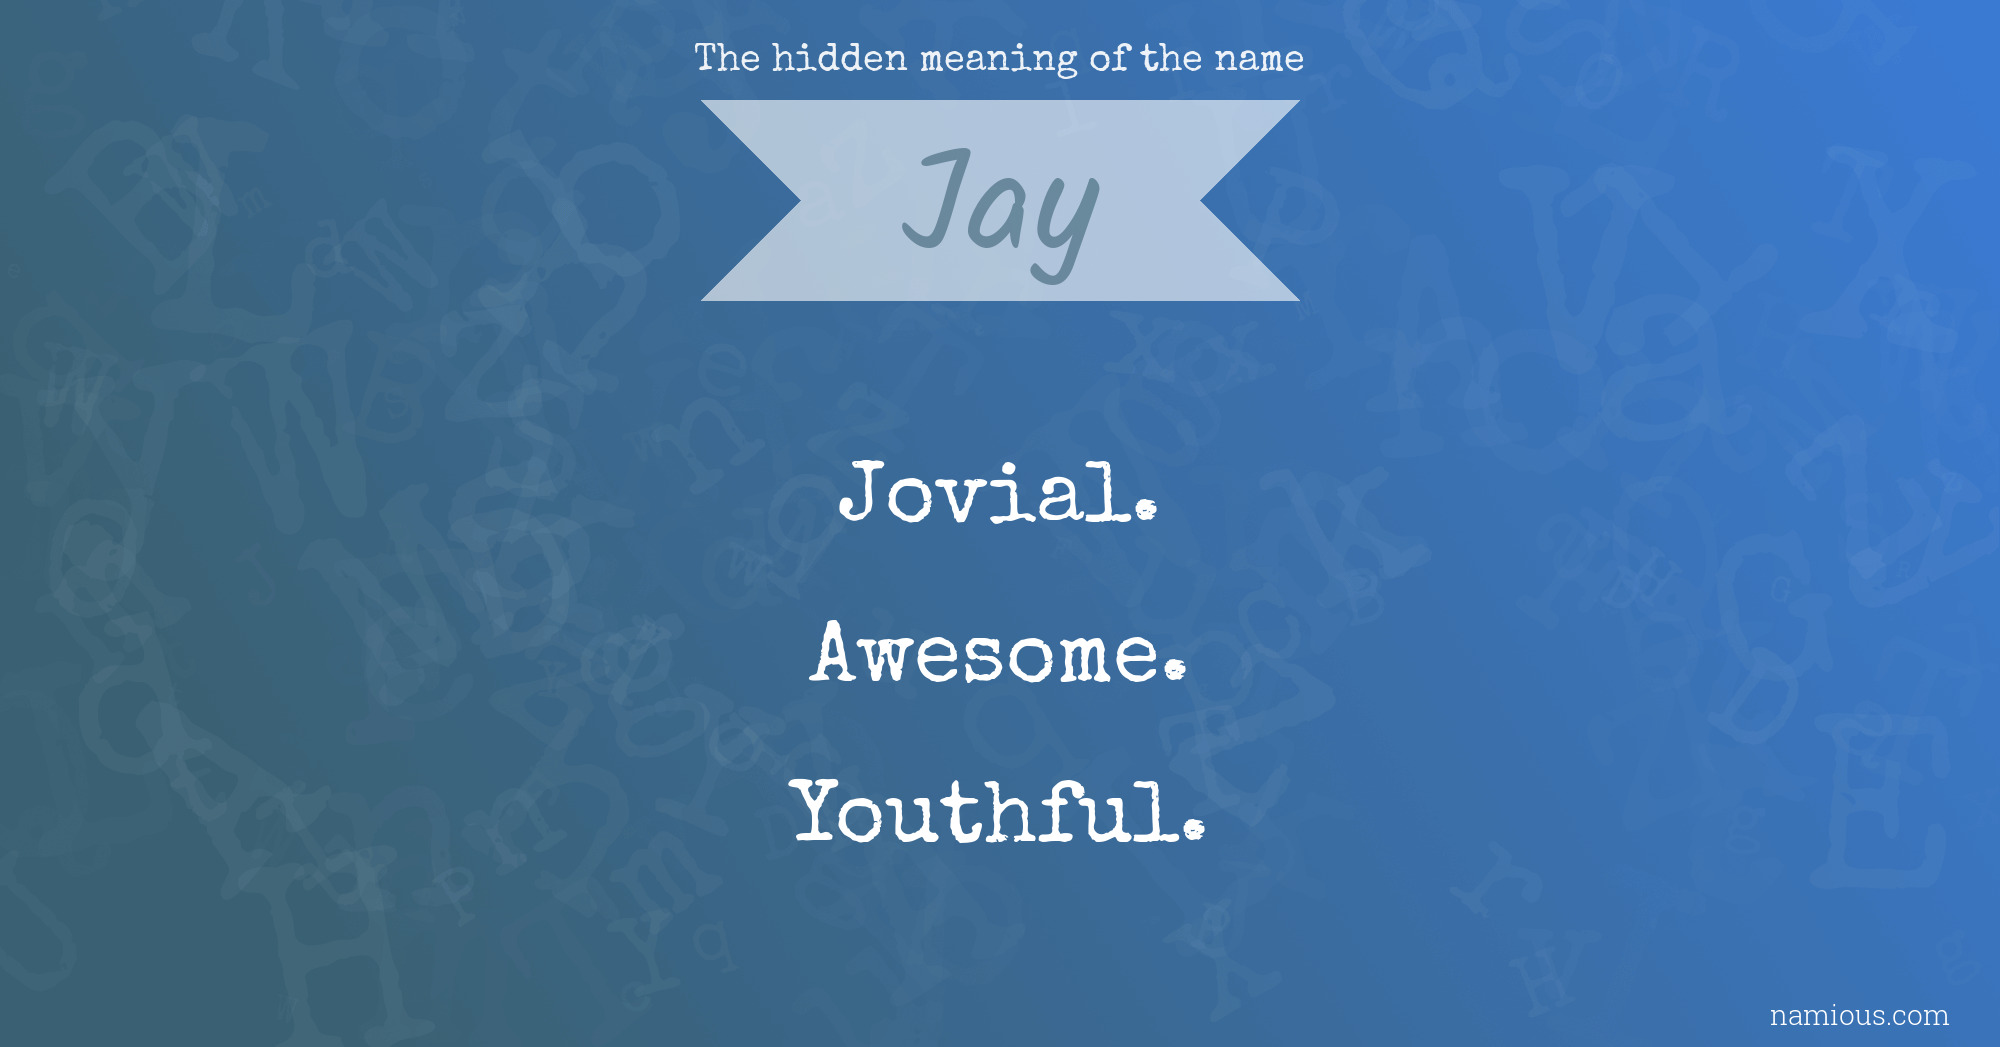 The hidden meaning of the name Jay